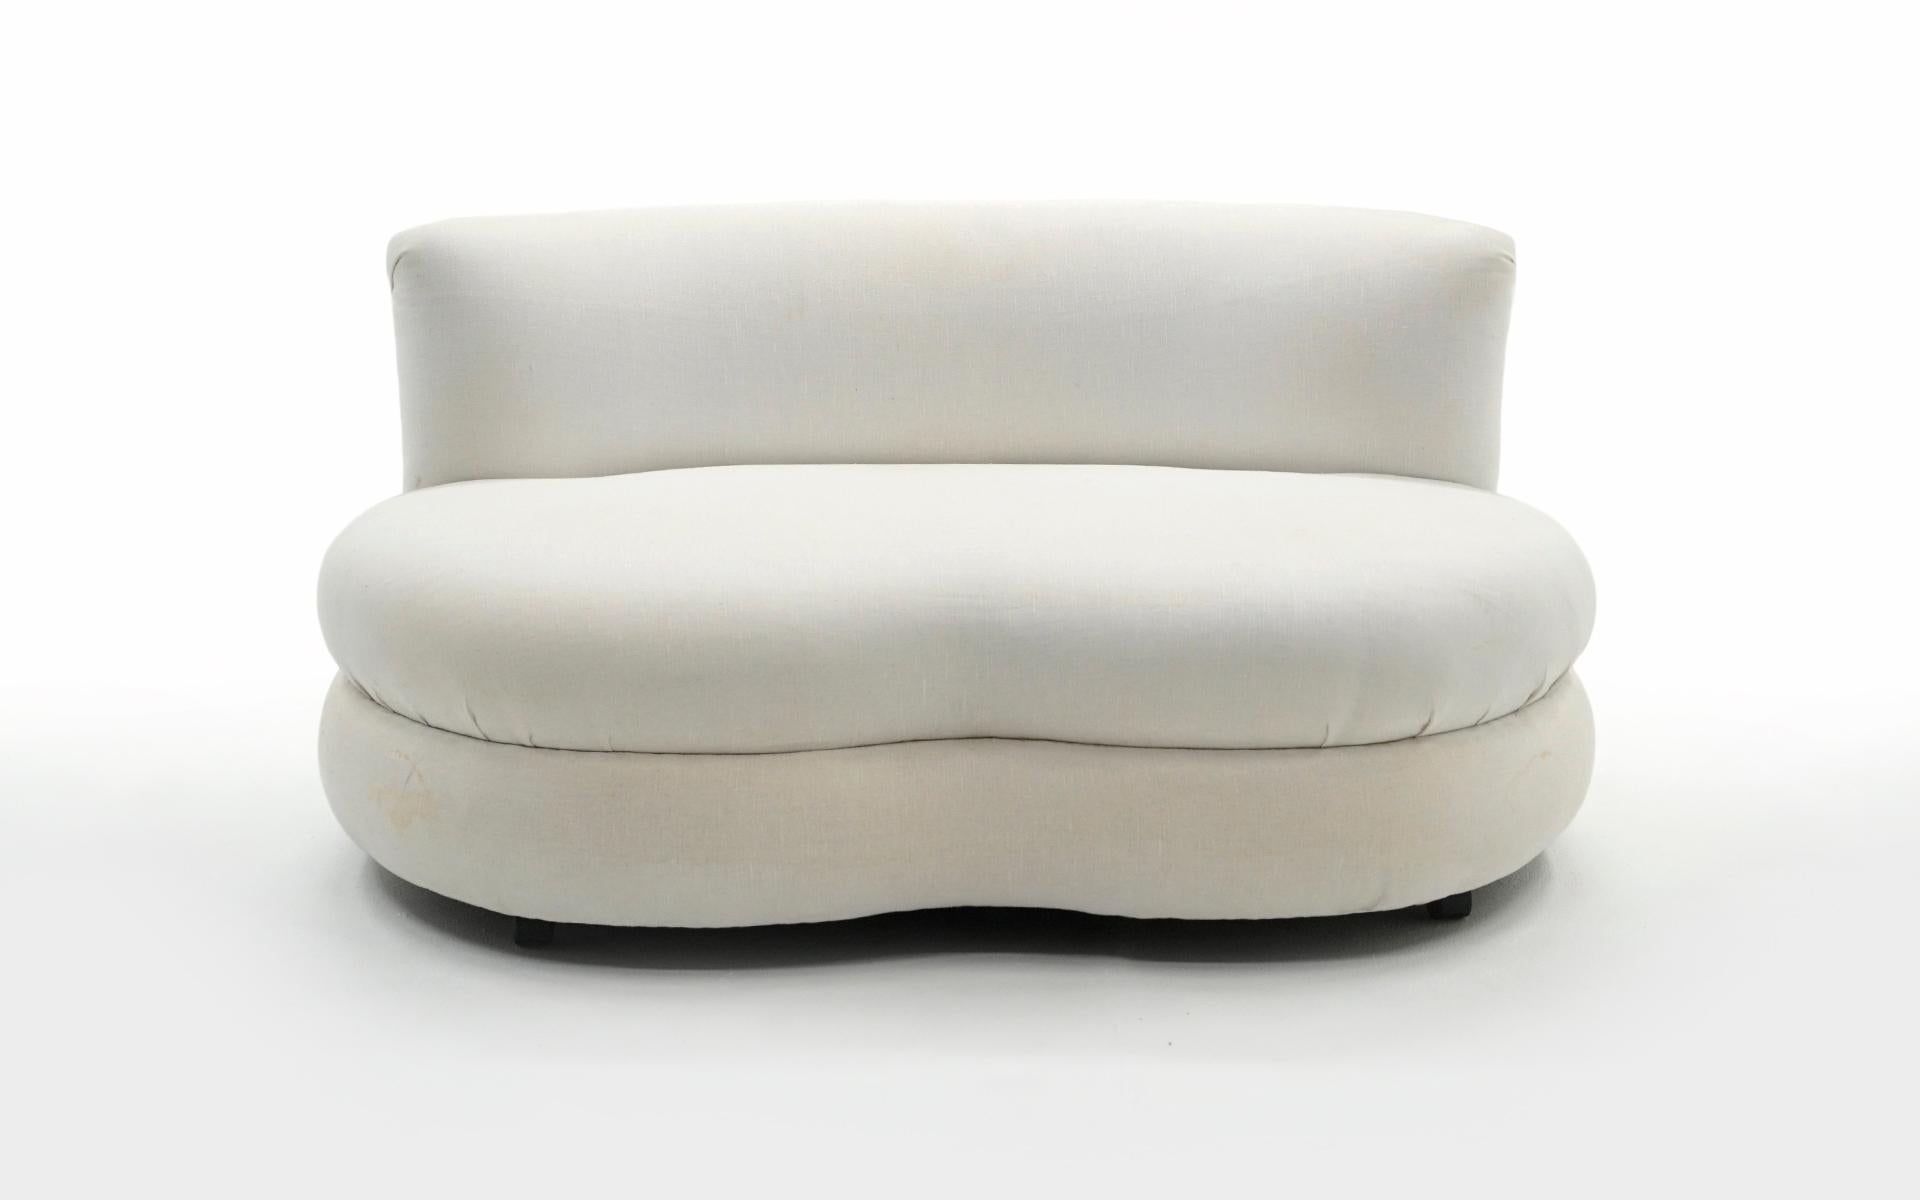 Cloud shaped settee / love seat / chair and a half in white upholstery. We are unsure of the designer but is similar to designs by Vladimir Kagan. Fixed cushion design. Foam is good. Fabric has areas of yellowing and light stains. It can be used as